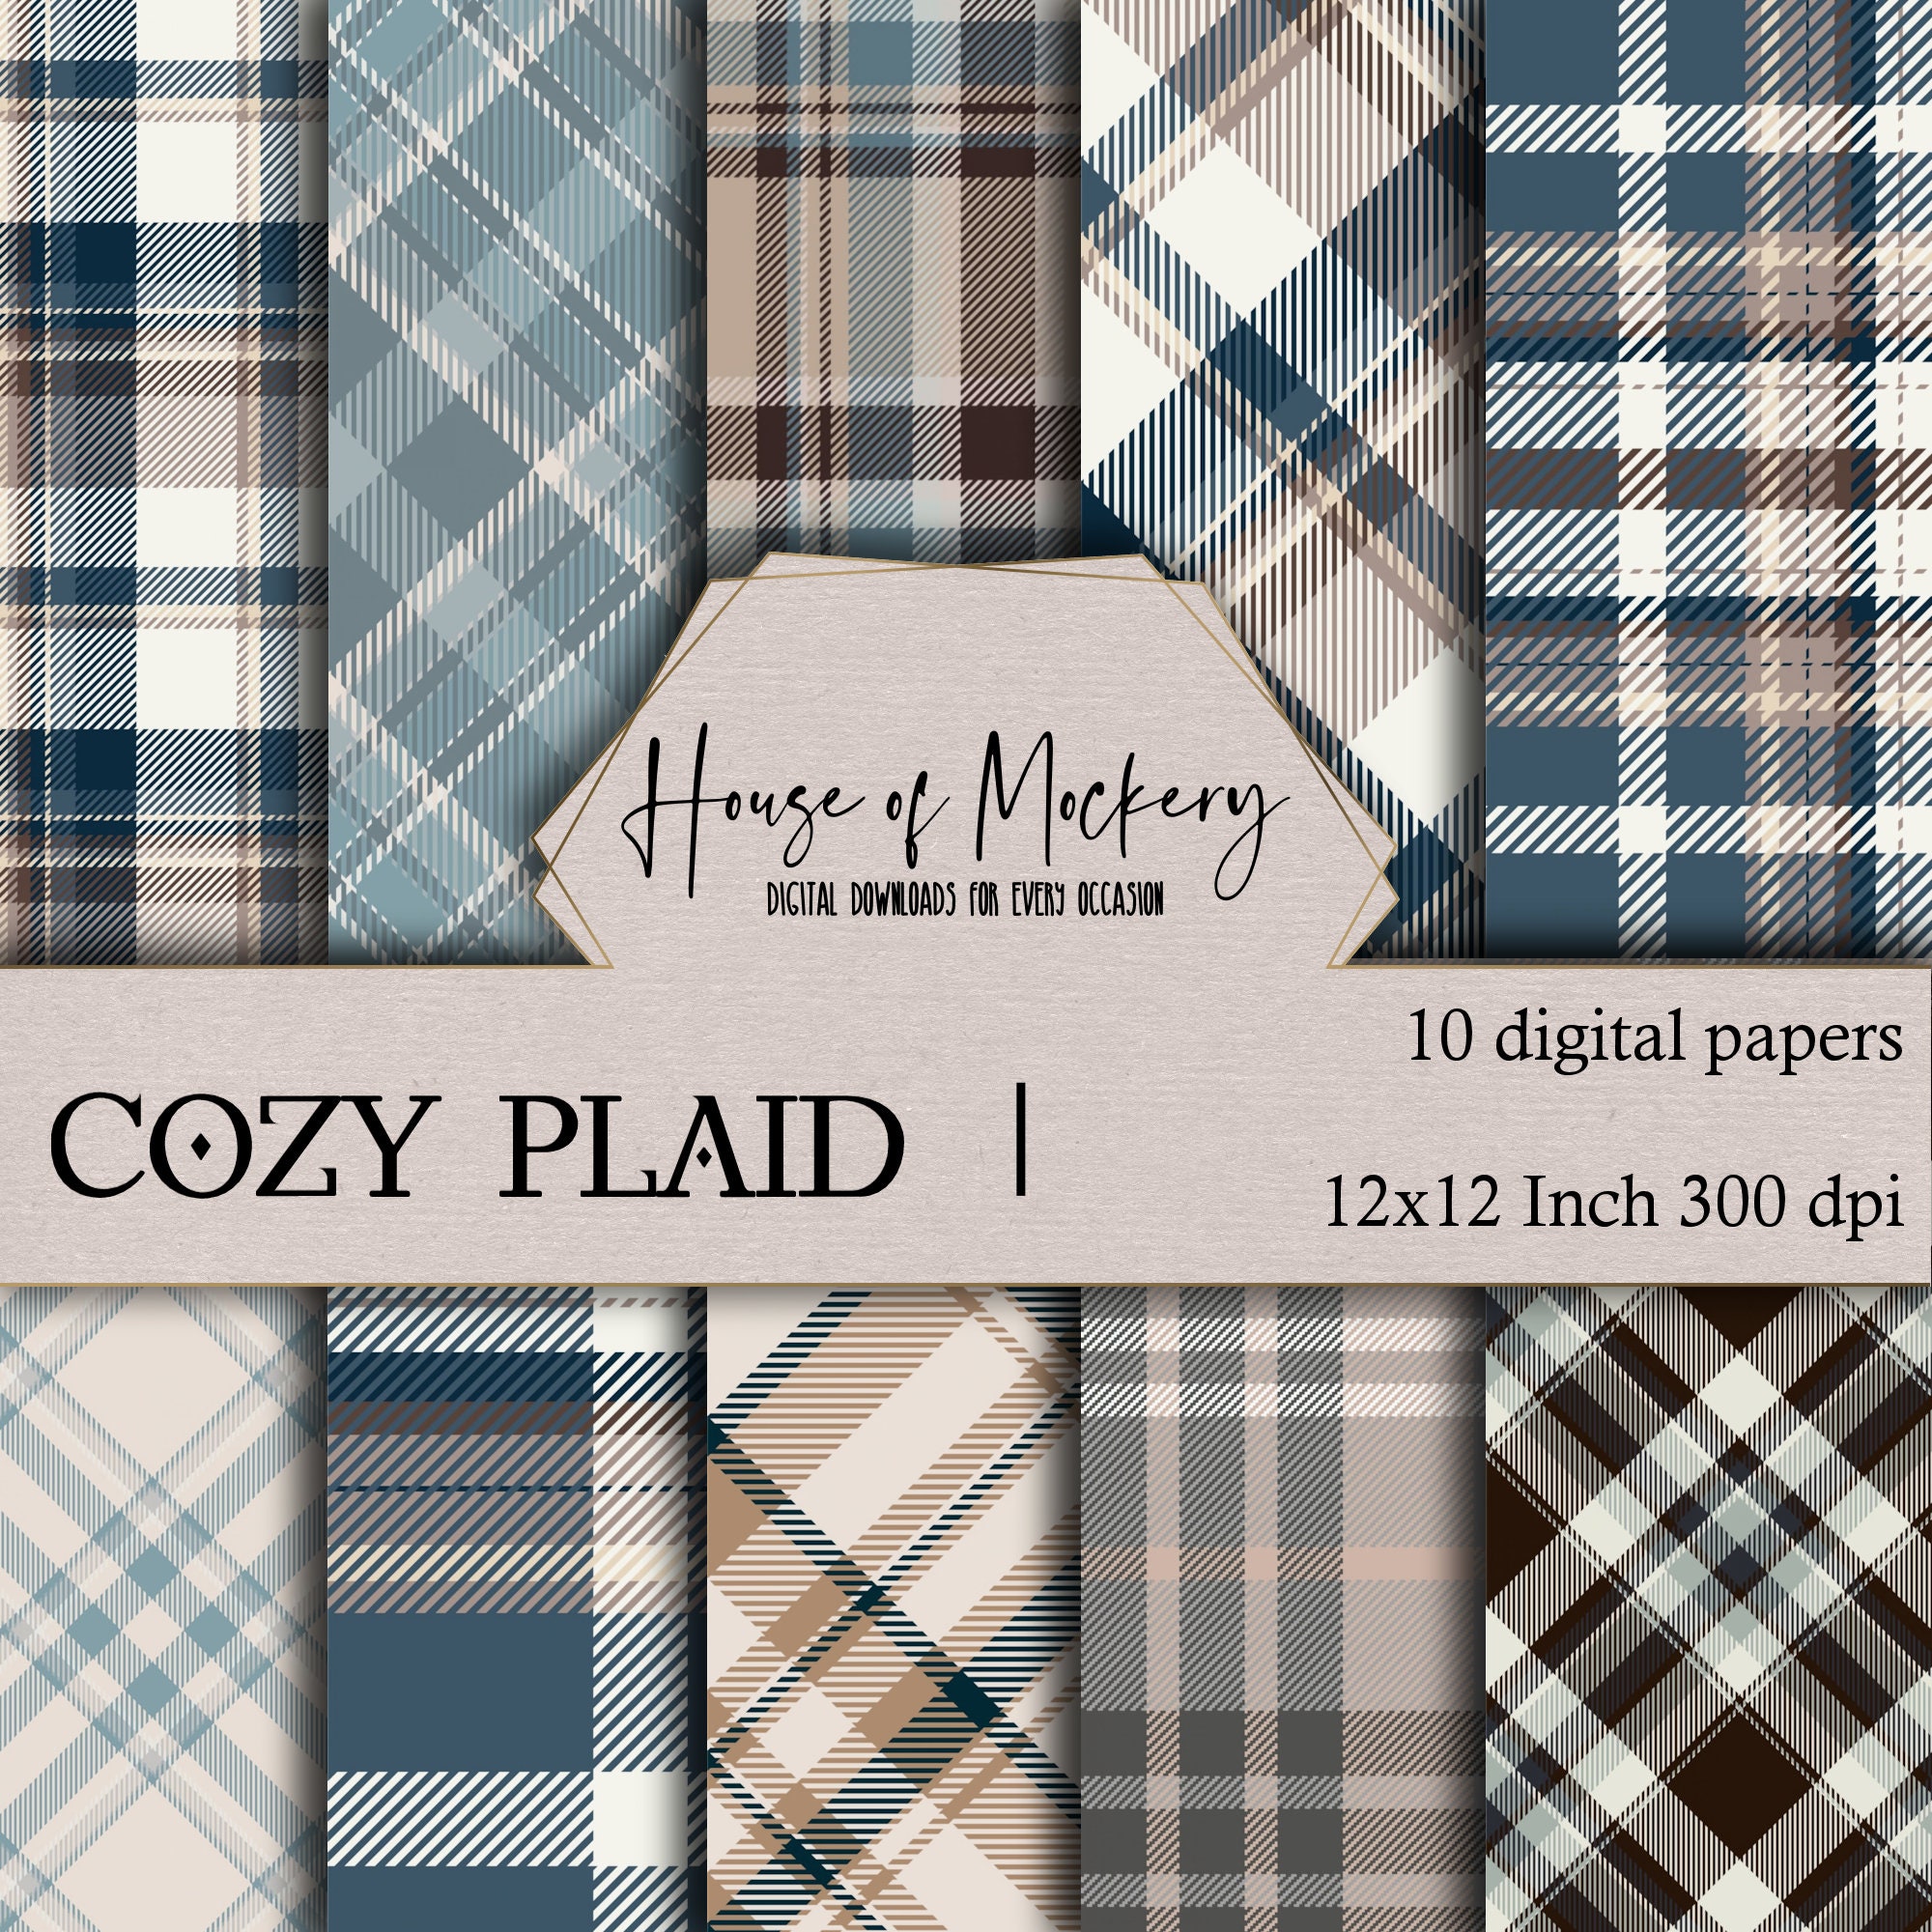 Haooryx 60pcs Fall Theme Patterned Paper 11'x11' Autumn Buffalo Plaid  Double-sided Origami Decorative Paper Maple Plaid Patterned Scrapbook Paper  for